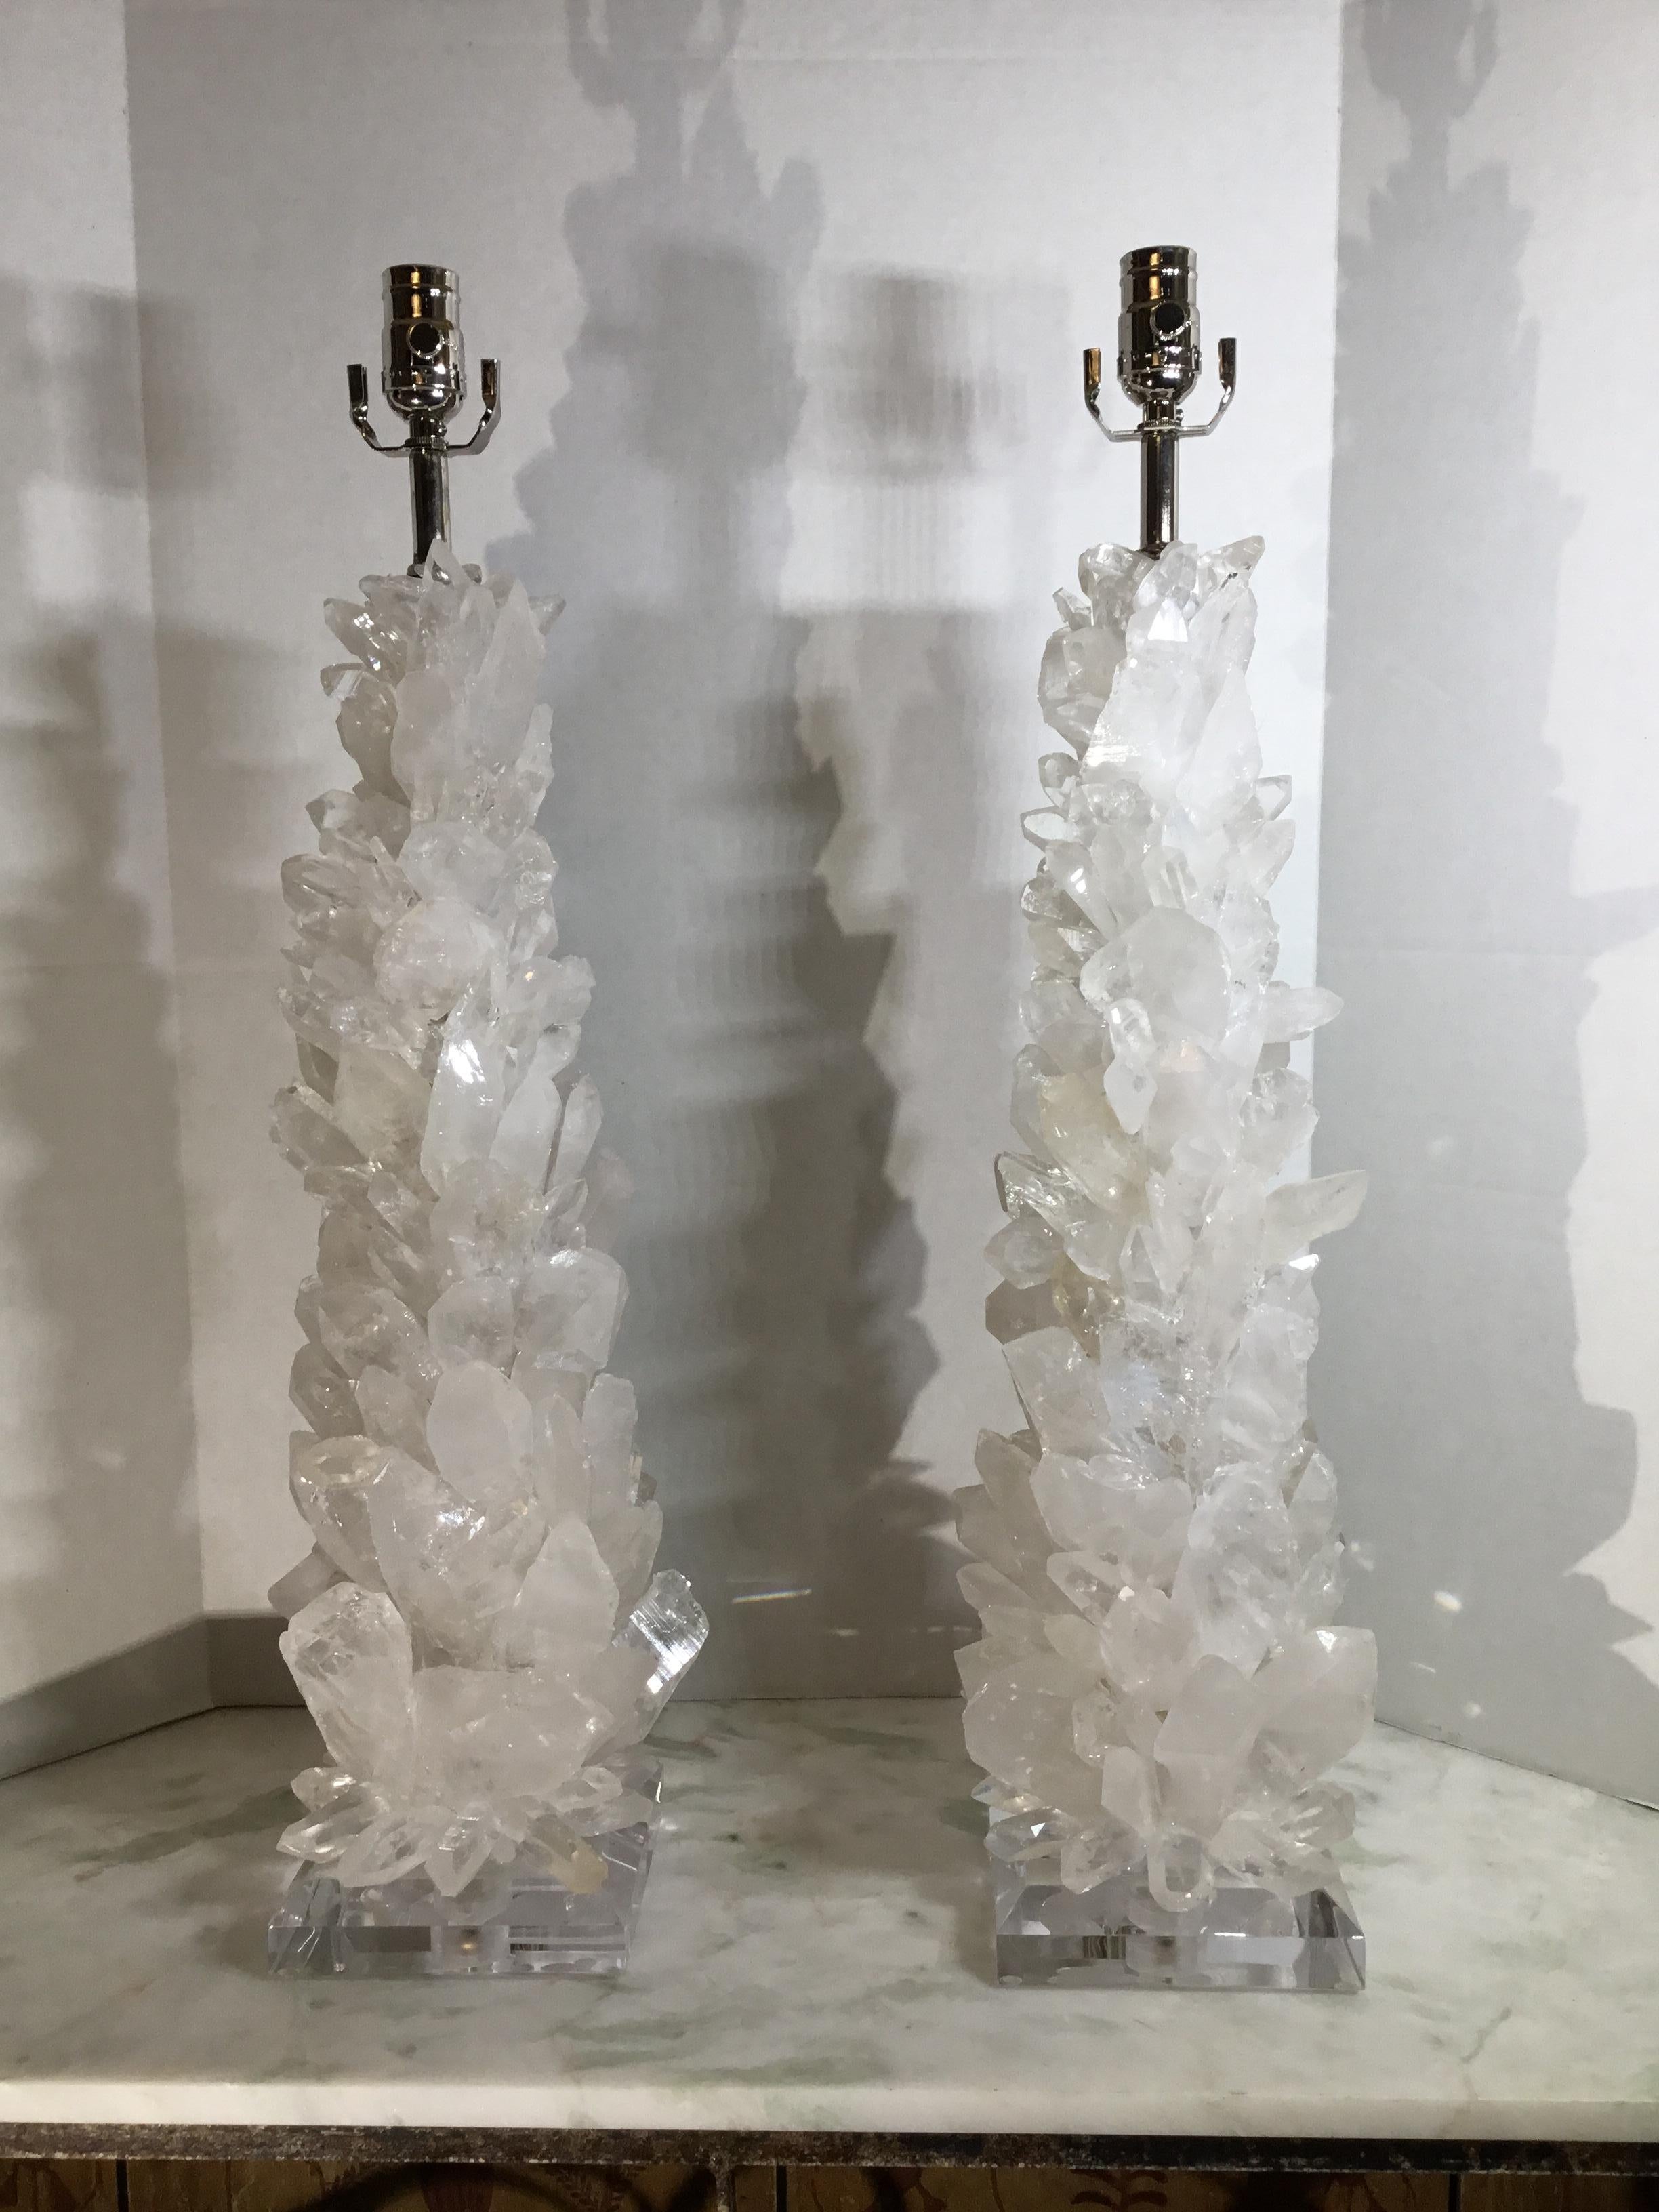 Beautiful pair of table lamps made of genuine white crystal quartz shards and clear point crystal quartz, artistically put together to make on of a kind impressive pair of table lamps for display .
Clear beveled Lucite base, size: 6” x 6” x